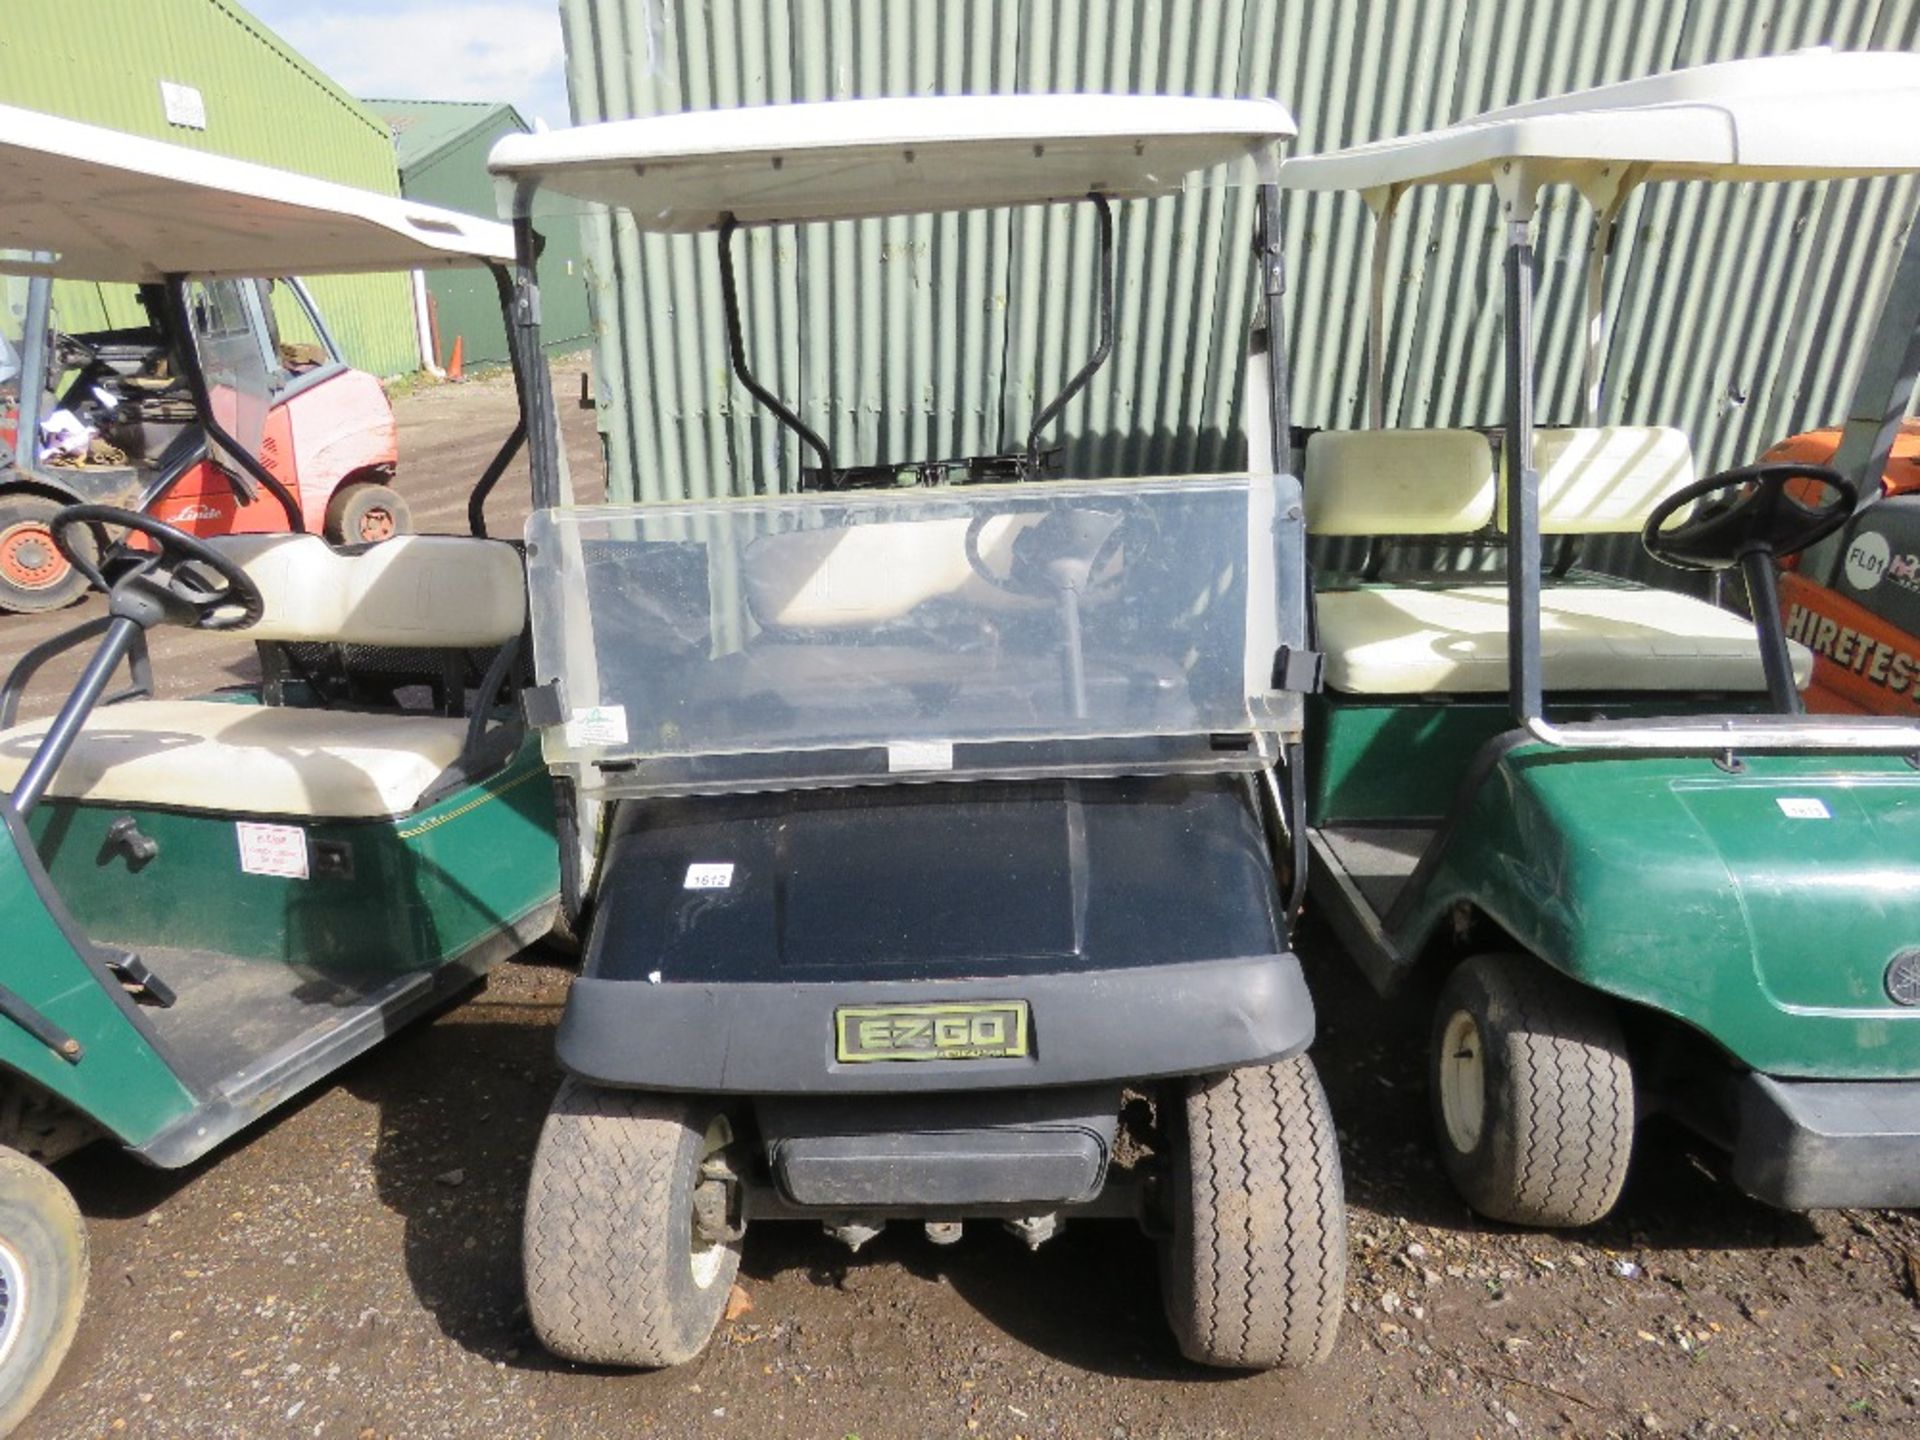 EZGO PETROL ENGINED GOLF BUGGY. BLACK COLOURED. WHEN TESTED WAS SEEN TO RUN, DRIVE, STEER AND BRAKE. - Image 2 of 7